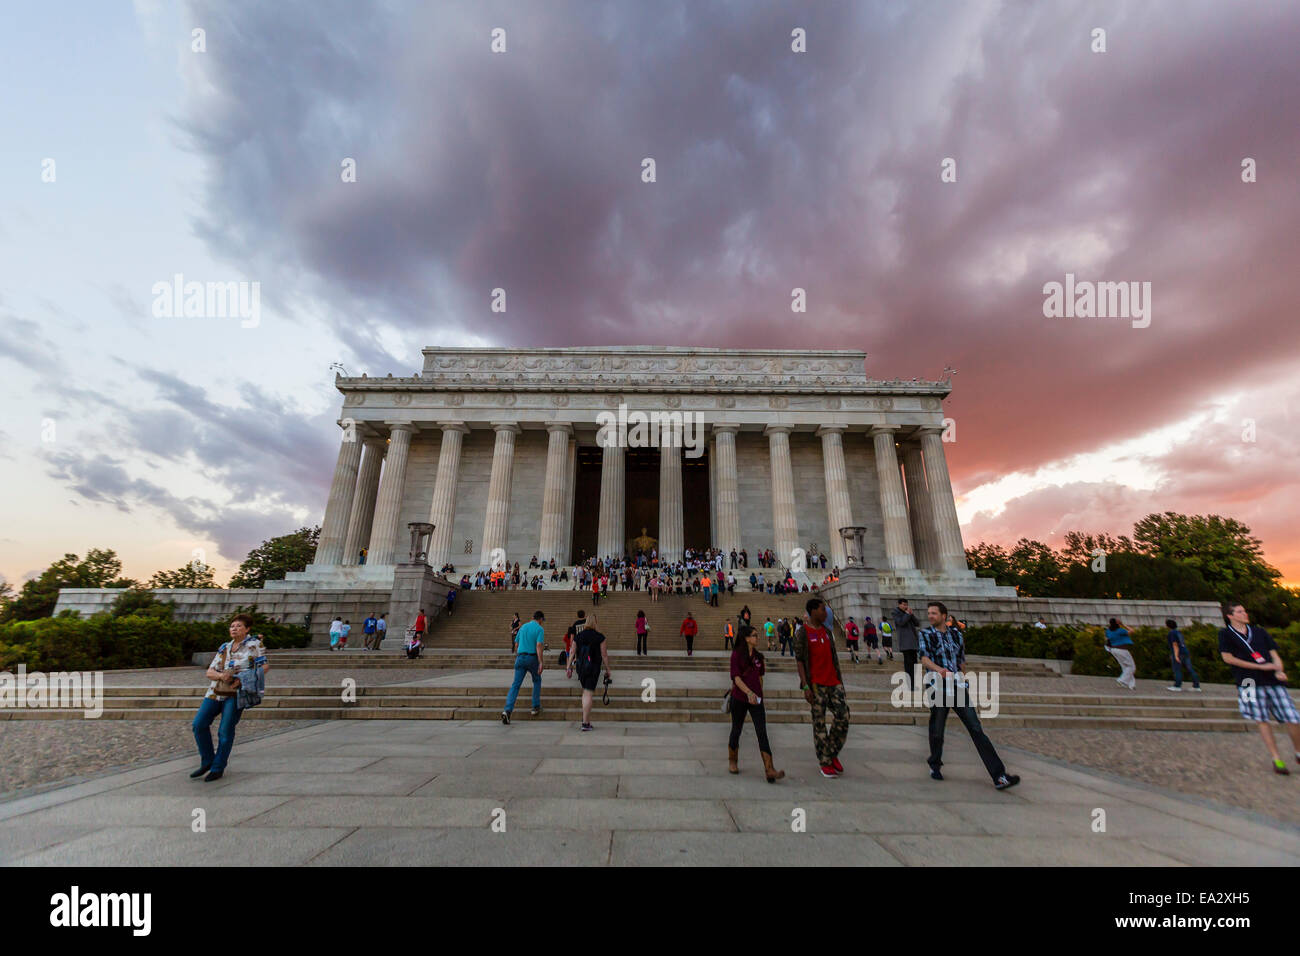 Exterior view of the Lincoln Memorial at sunset, Washington D.C., United States of America, North America Stock Photo